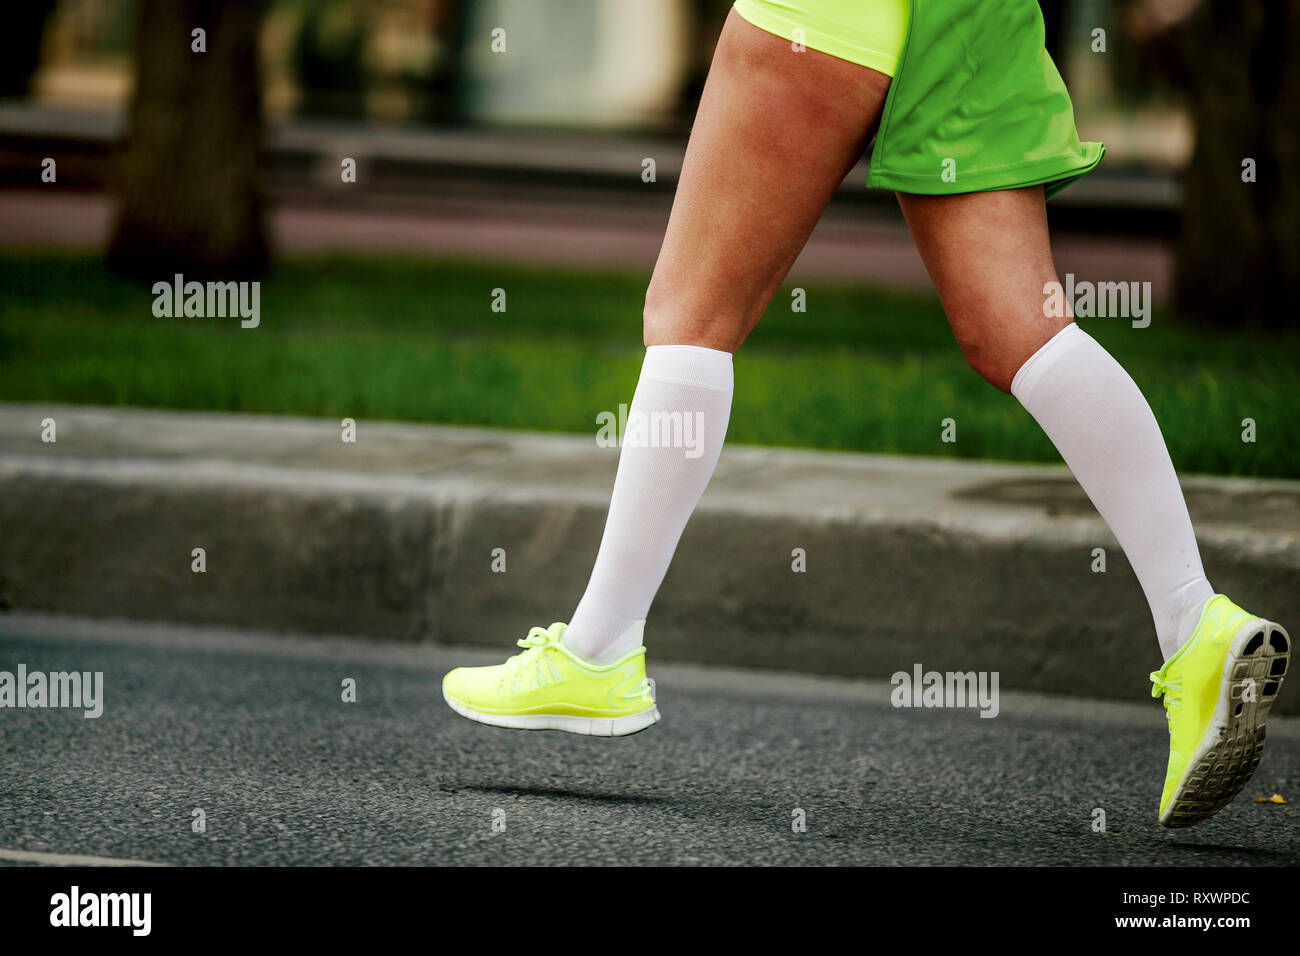 women feet in white compression socks and bright green running shoes Stock Photo